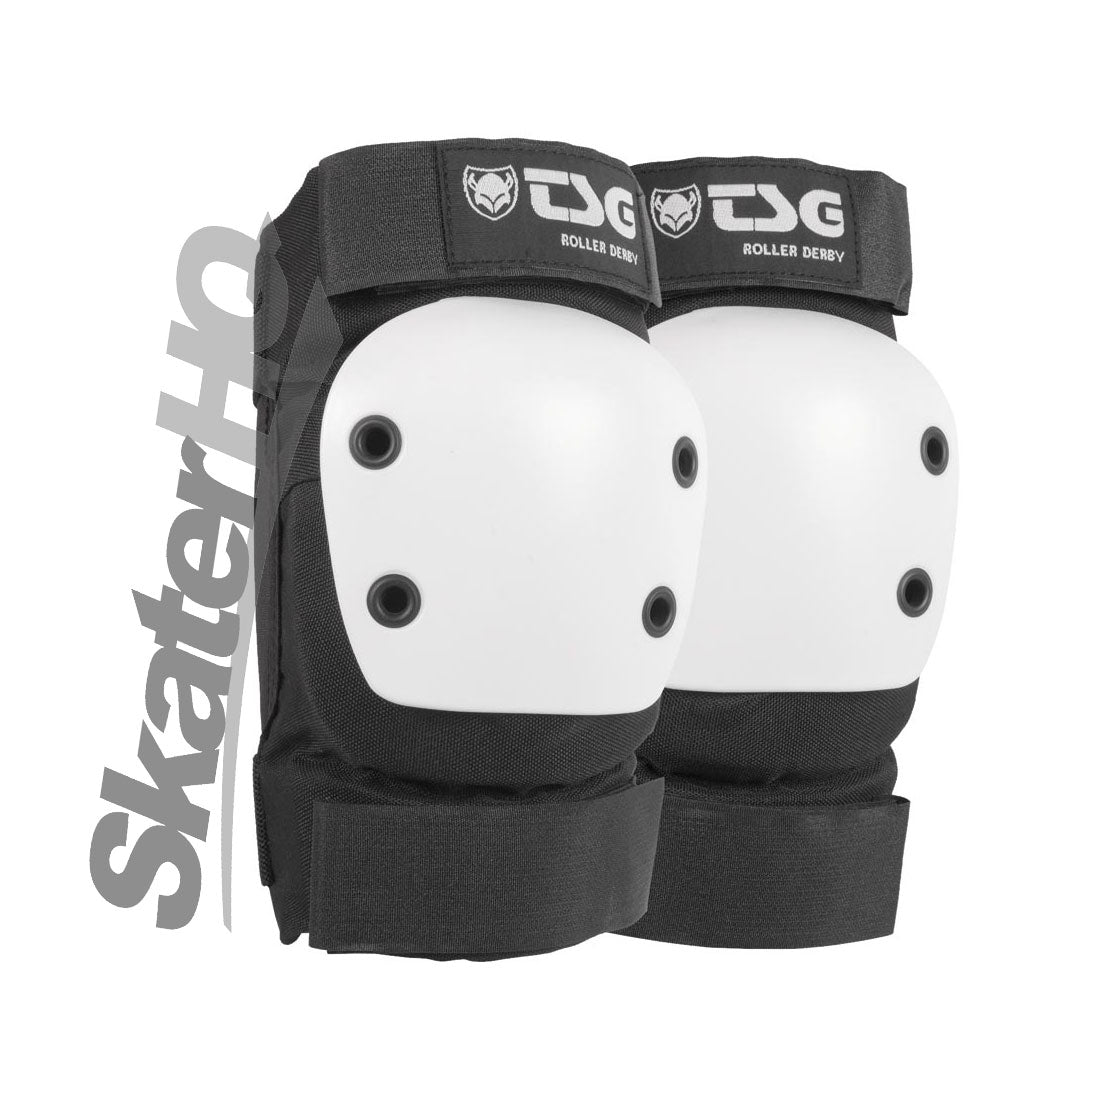 TSG Rollerderby Elbow 2.0 - Large Protective Gear